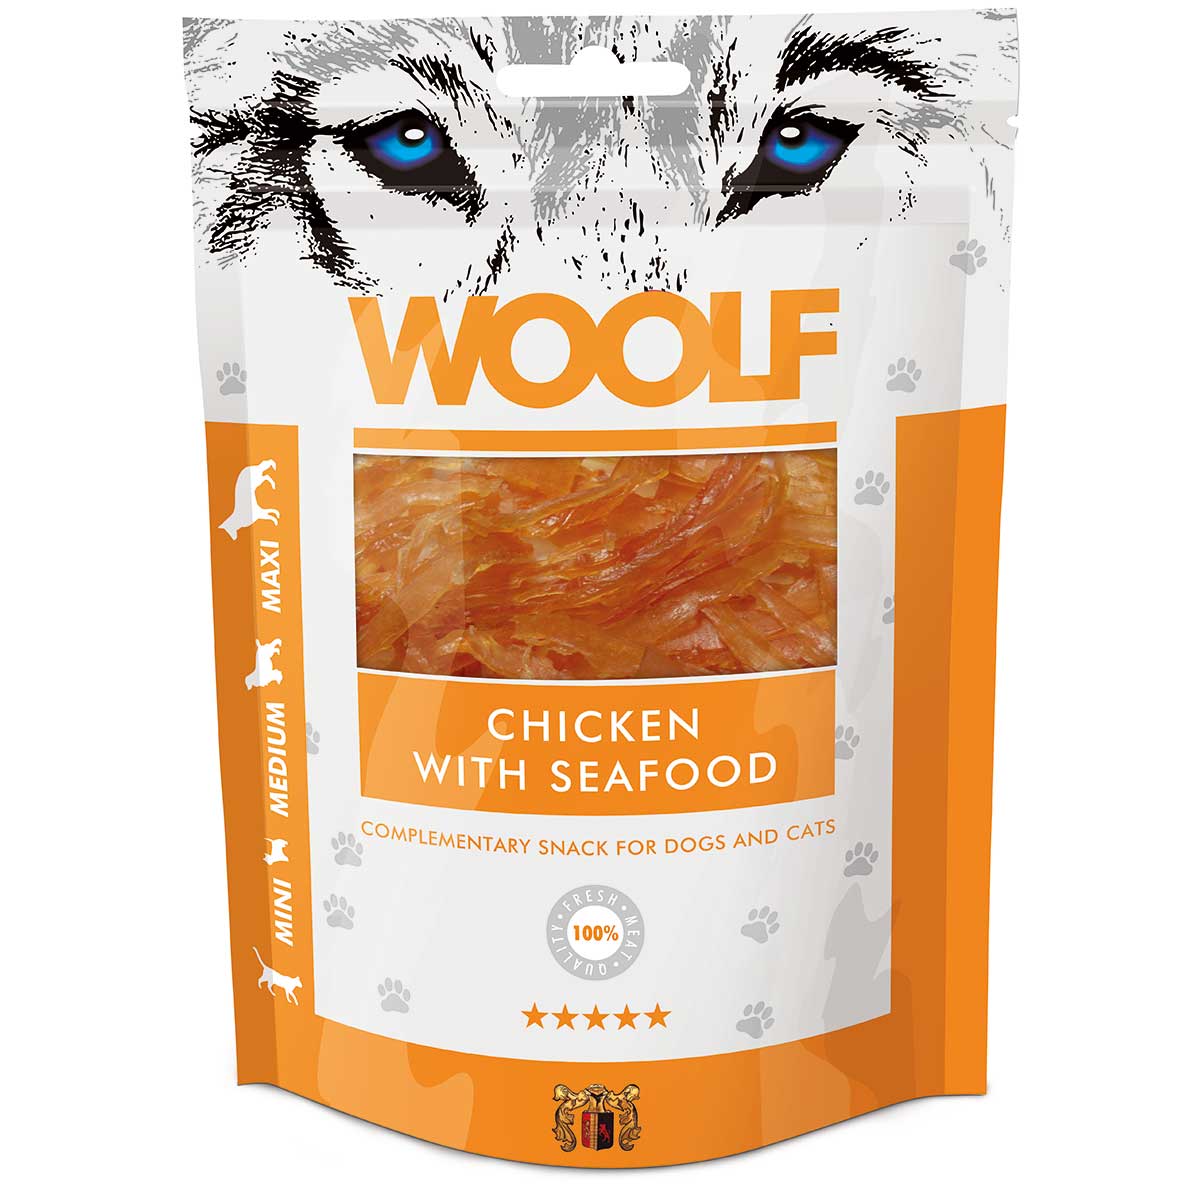 Woolf Dog treat chicken with seafood